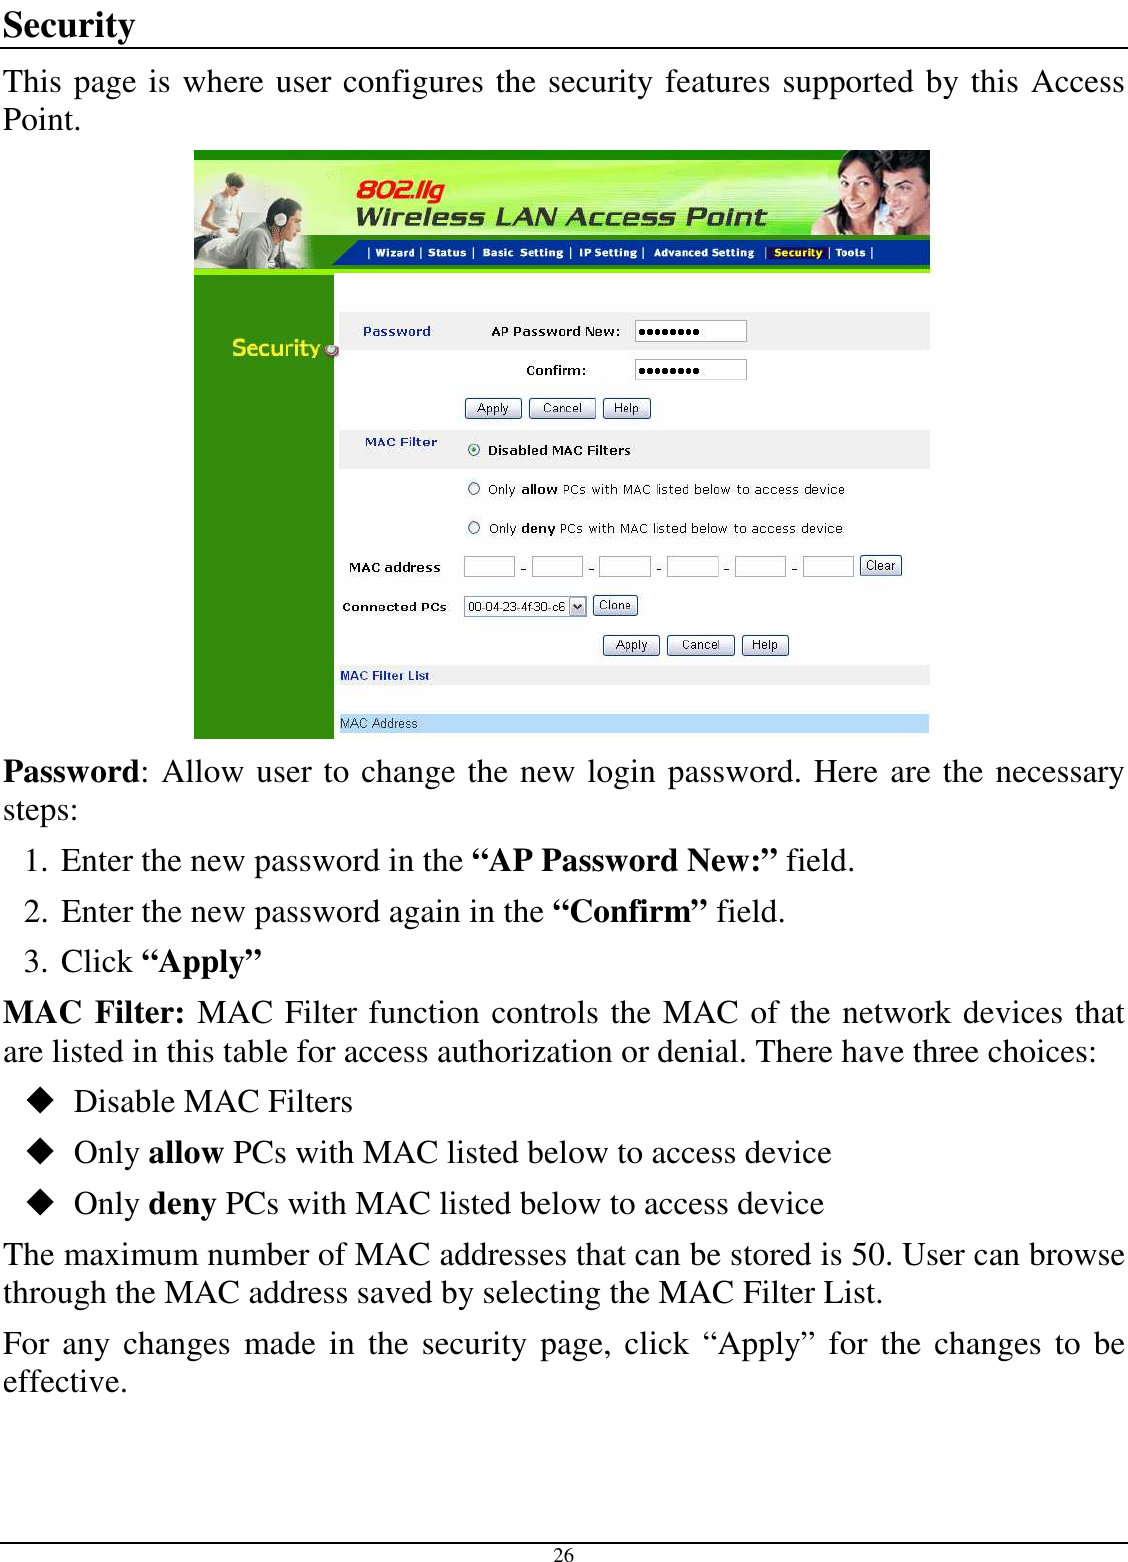  26 Security This page is where user configures the security features supported by this Access Point.  Password: Allow user to change the new login password. Here are the necessary steps: 1. Enter the new password in the “AP Password New:” field. 2. Enter the new password again in the “Confirm” field. 3. Click “Apply” MAC Filter: MAC Filter function controls the MAC of the network devices that are listed in this table for access authorization or denial. There have three choices:  Disable MAC Filters  Only allow PCs with MAC listed below to access device  Only deny PCs with MAC listed below to access device The maximum number of MAC addresses that can be stored is 50. User can browse through the MAC address saved by selecting the MAC Filter List. For any changes  made in the security page, click “Apply” for  the changes to  be effective. 